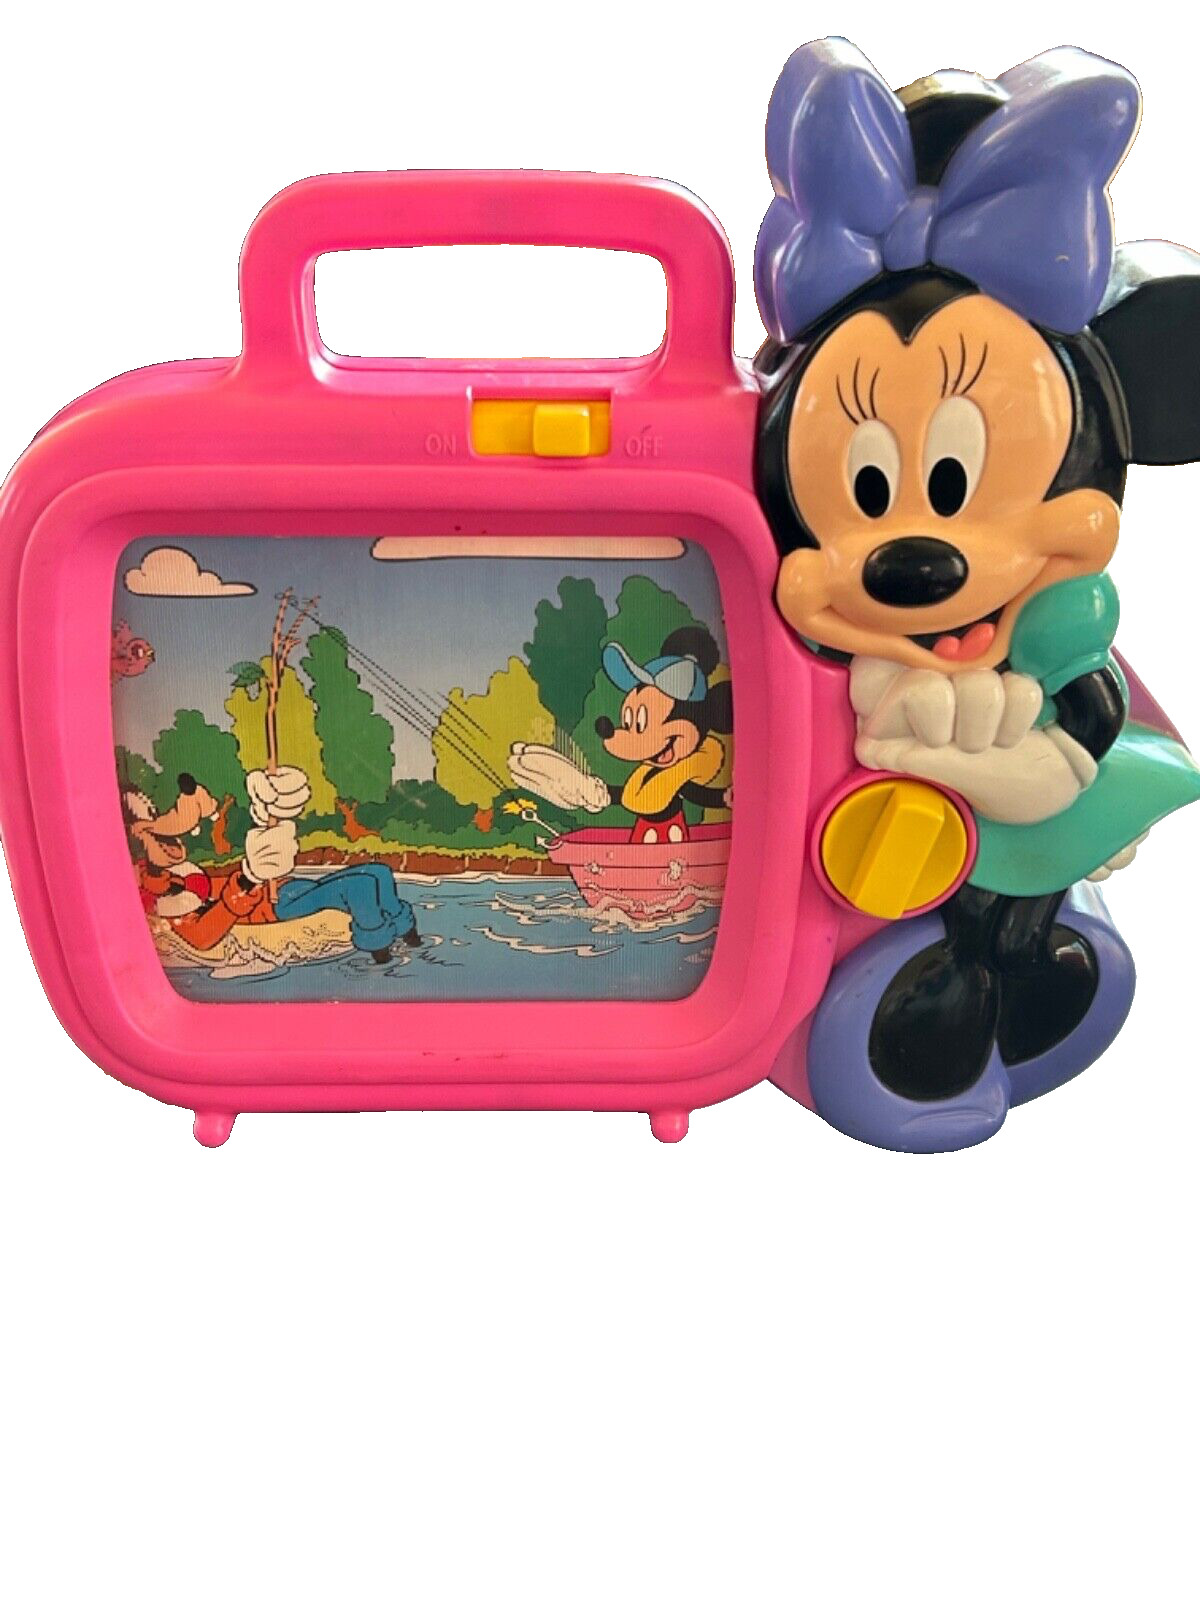 Vintage Disney Minnie Mouse TV Screen With Wind  Up Music Works